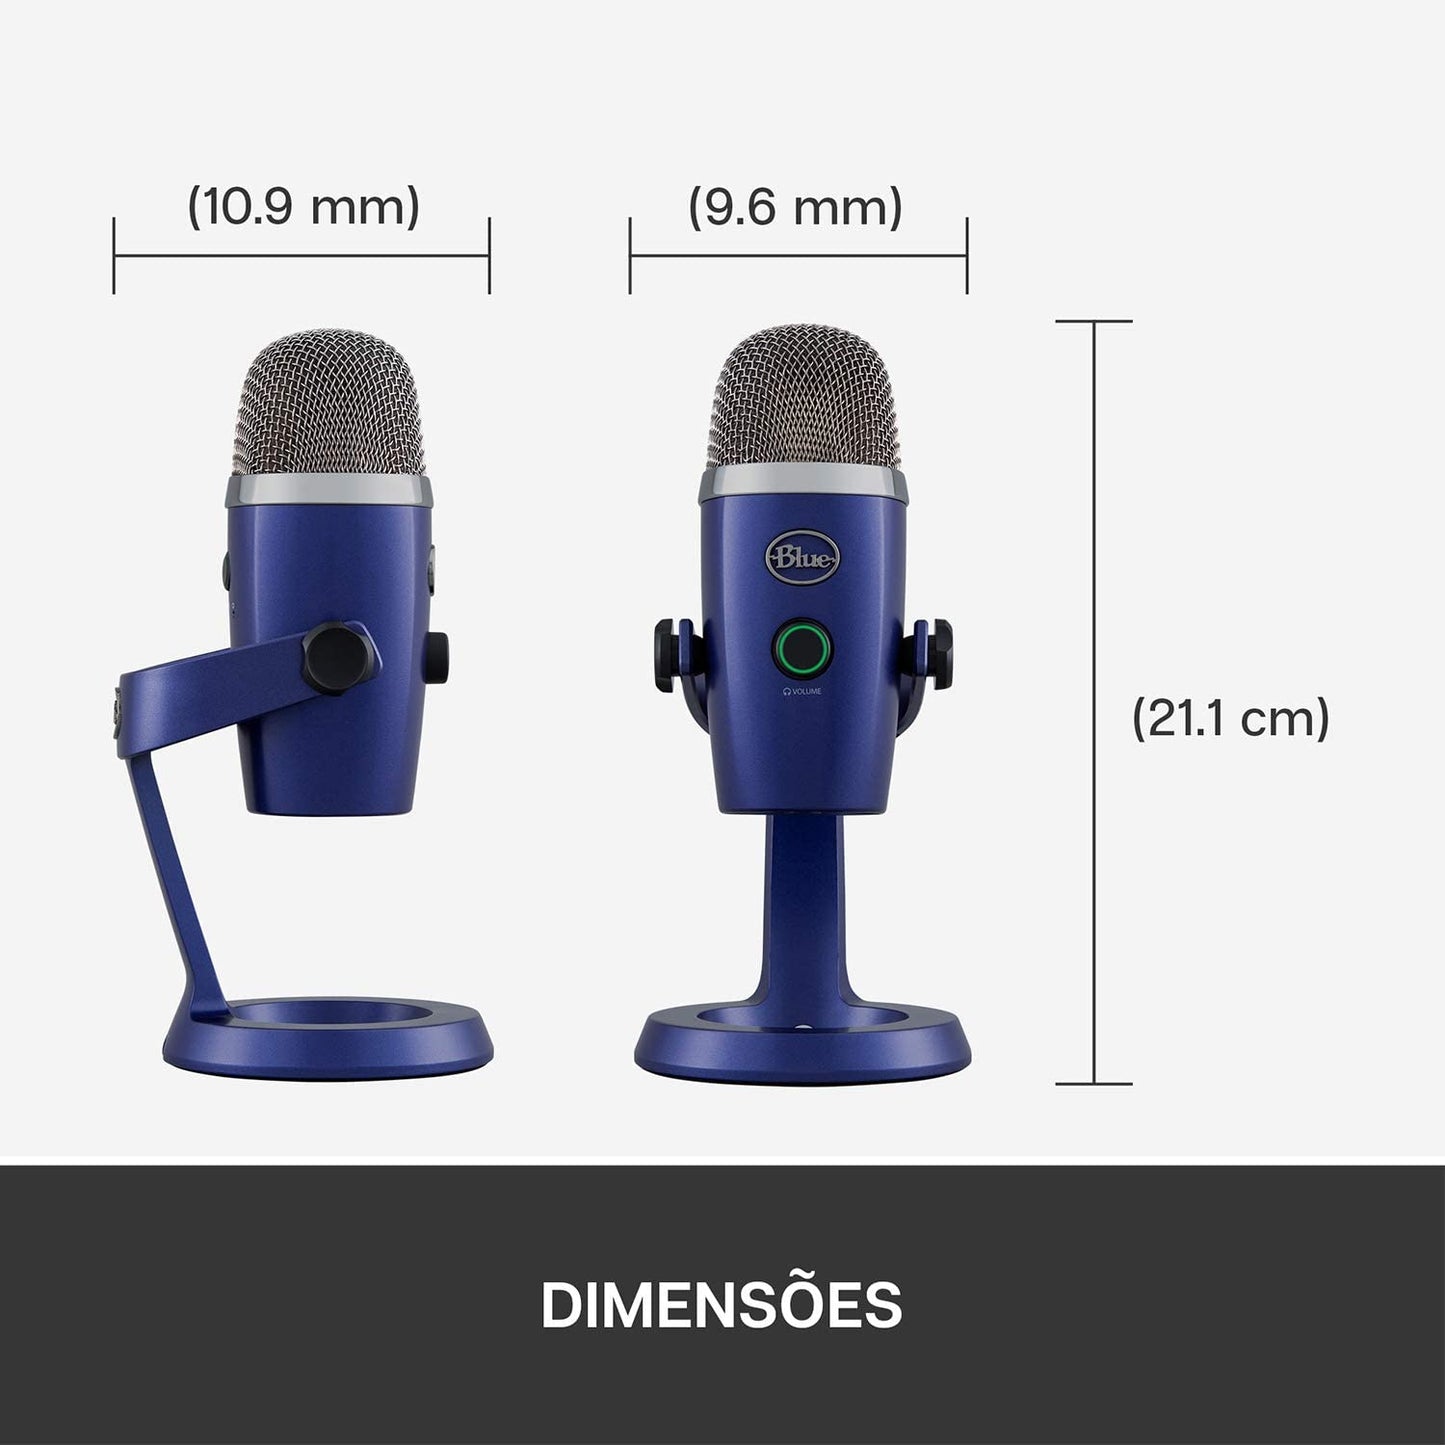 Blue microphones Blue Yeti Nano Premium USB Microphone for Recording, Streaming, Gaming, Podcasting on PC and Mac, Condenser Mic with Blue VO!CE Effects, Cardioid and Omni, No-Latency Monitoring - Vivid Blue Vivid Blue Microphone